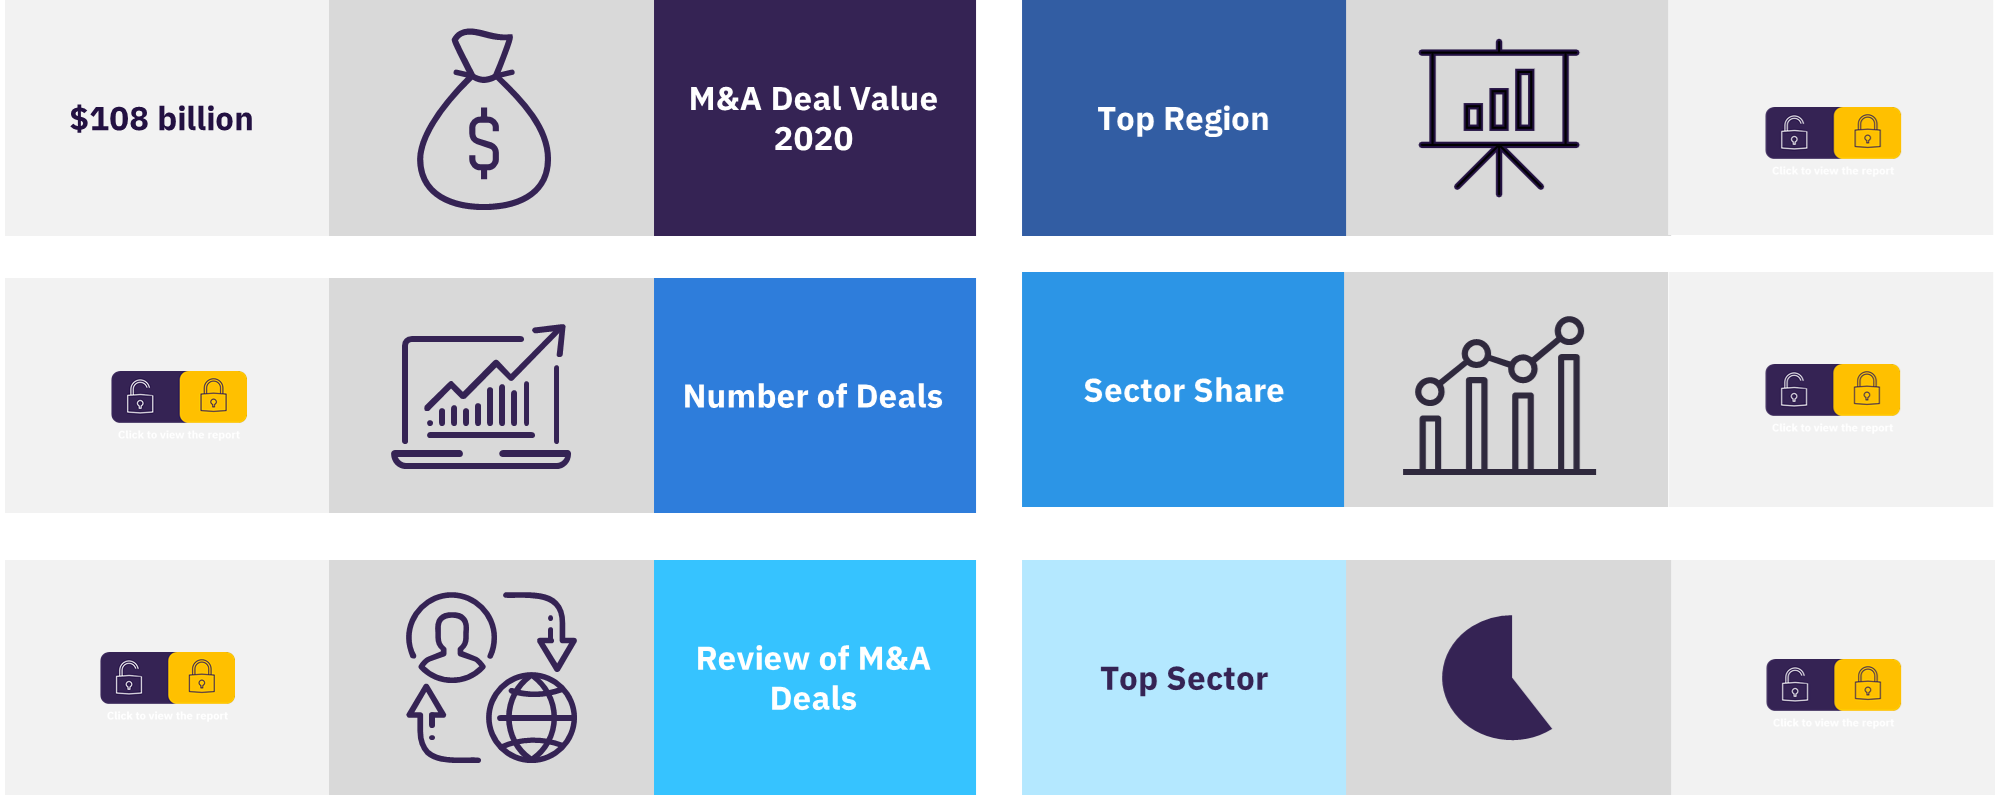 Overview of the global M&A deals in the retail sector